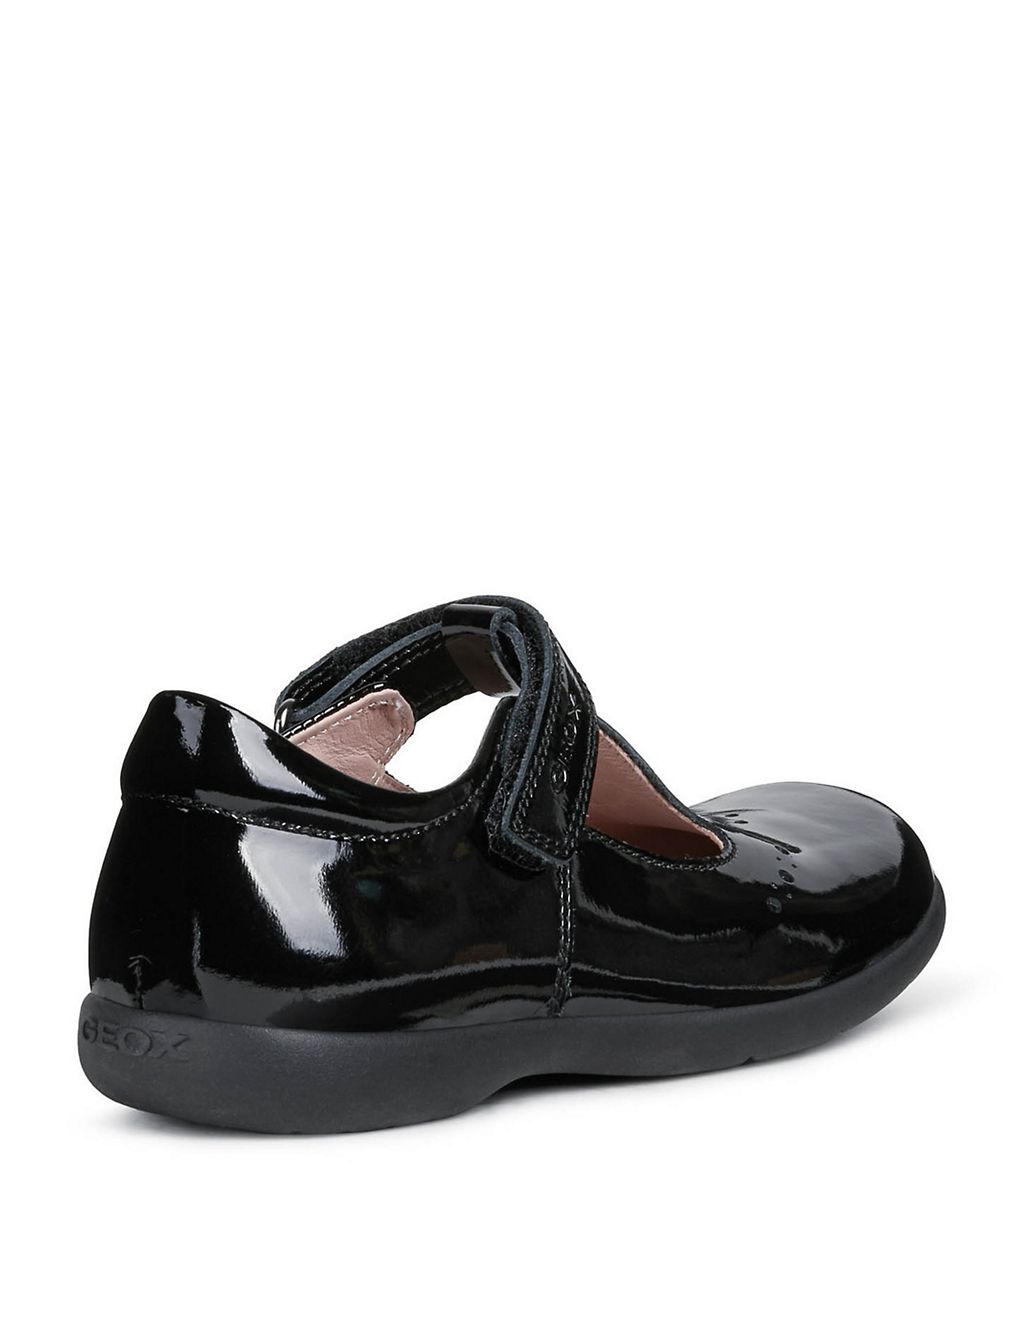 Kids' Patent Leather School Shoes (8½ Small-12½ Small) 4 of 6